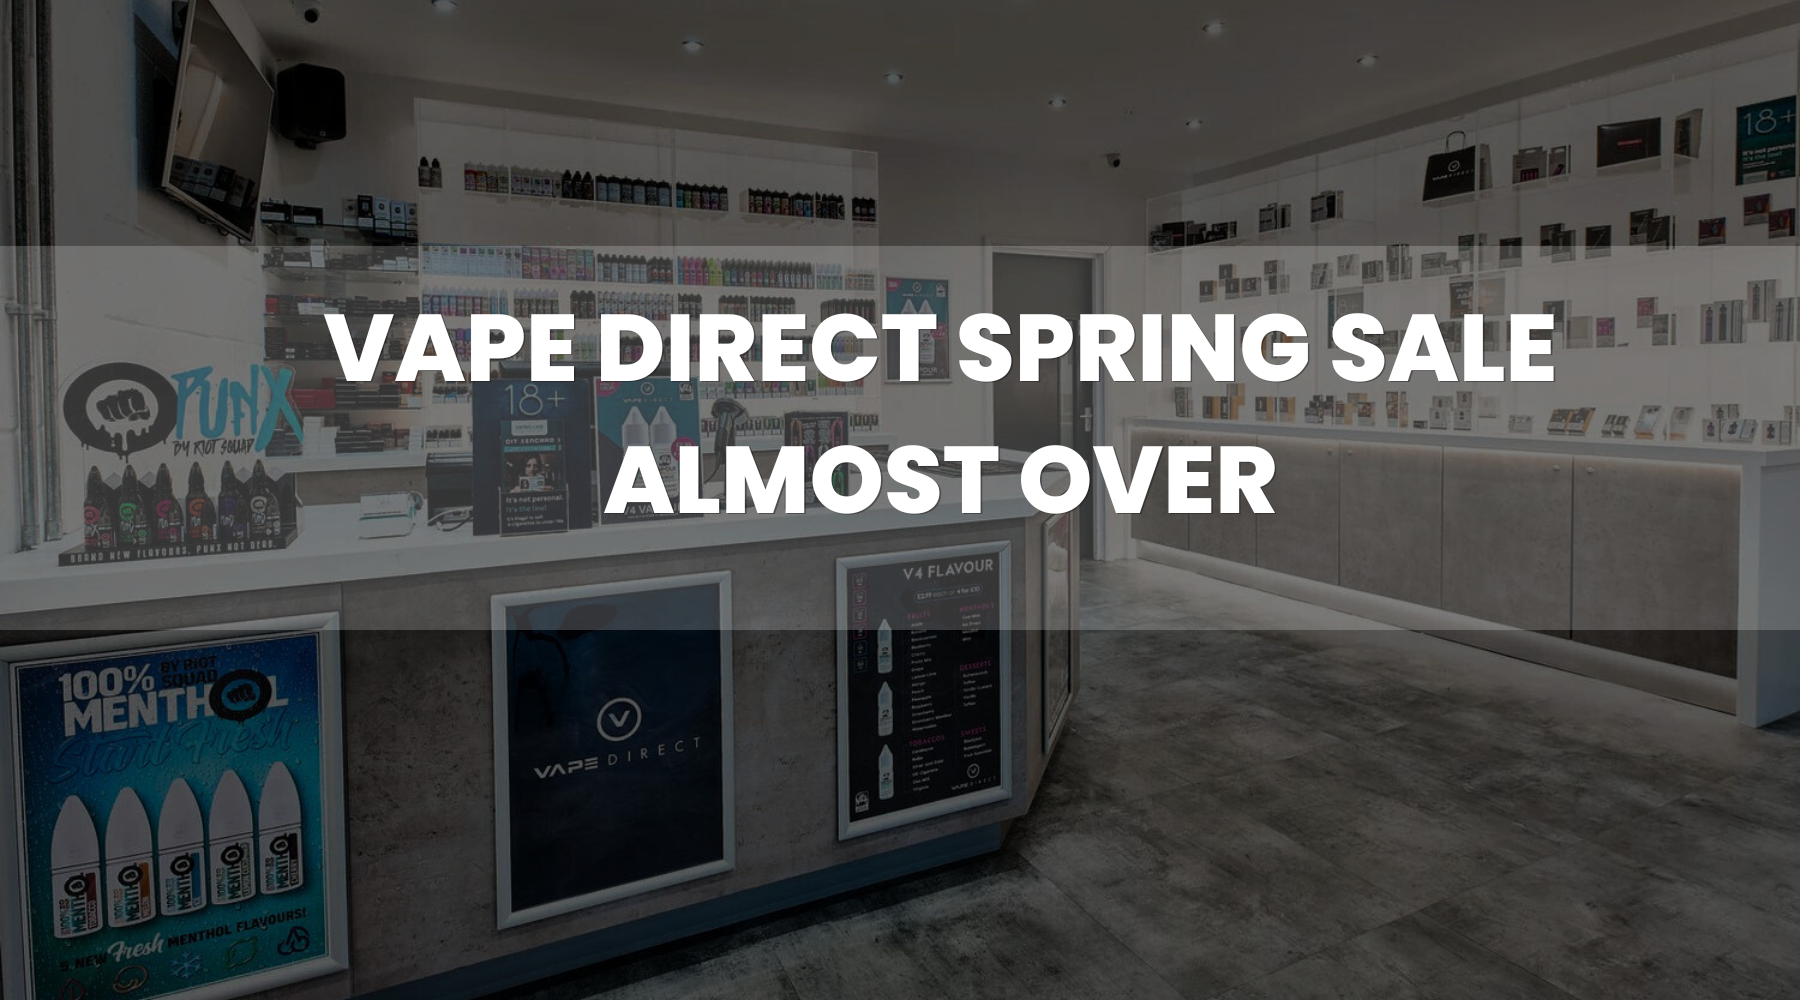 Vape Direct Spring Sale is Almost Over!